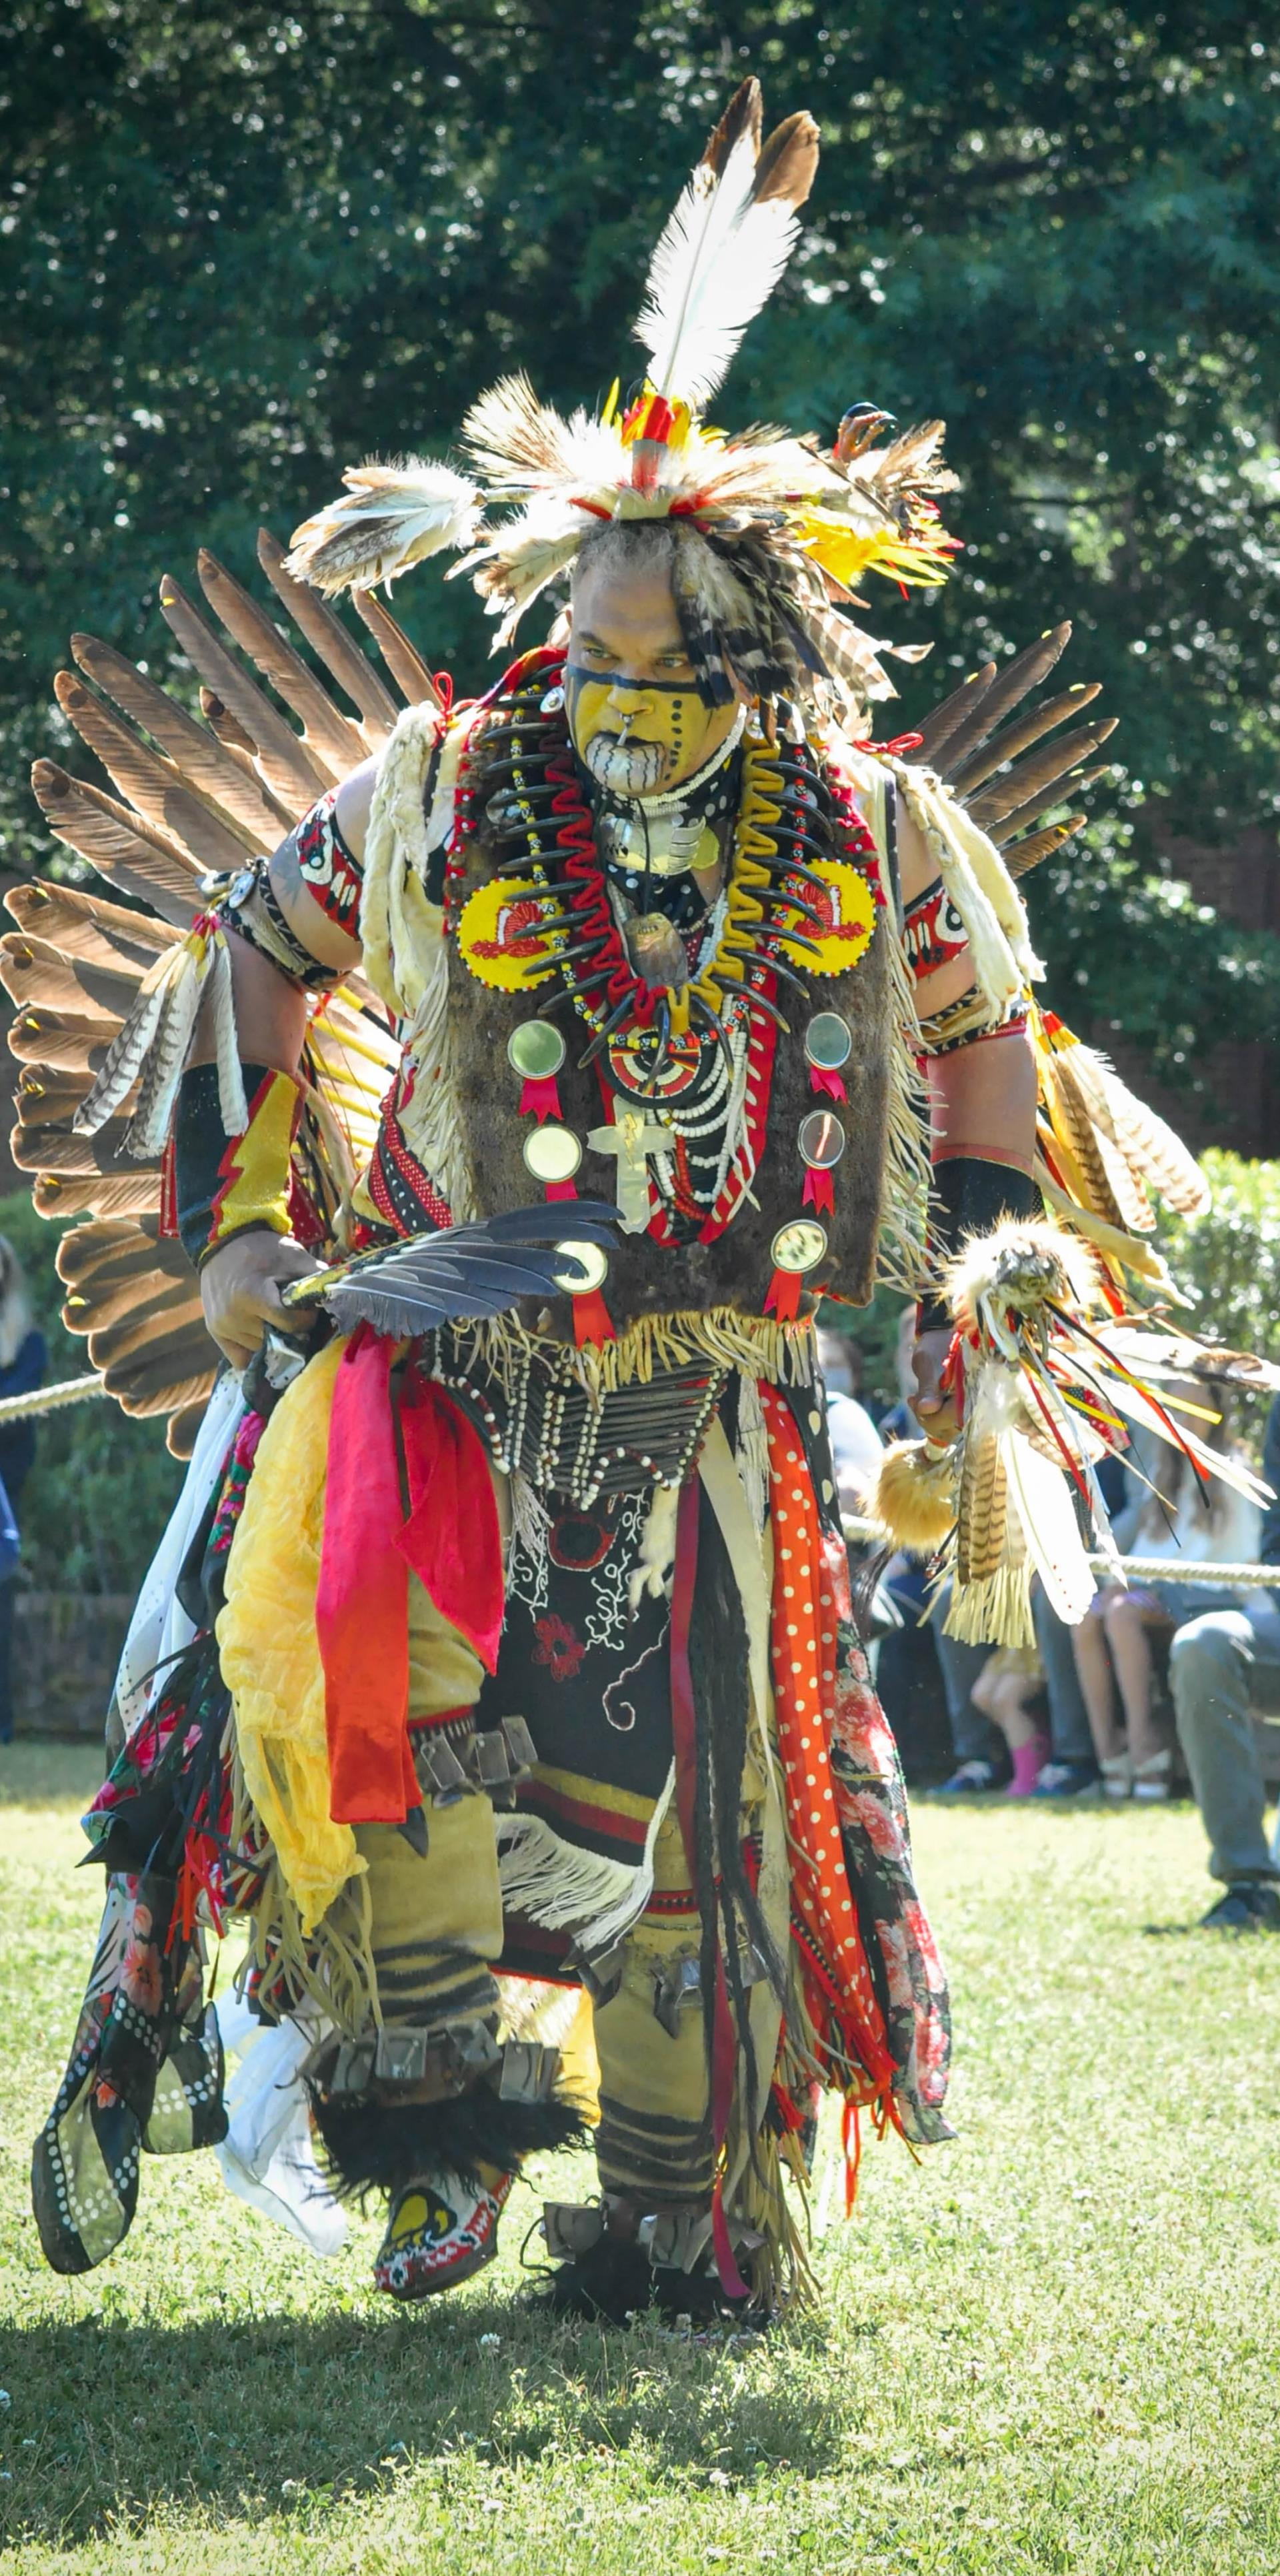 A Virginia Indian dance performer at Indigenous Arts Day